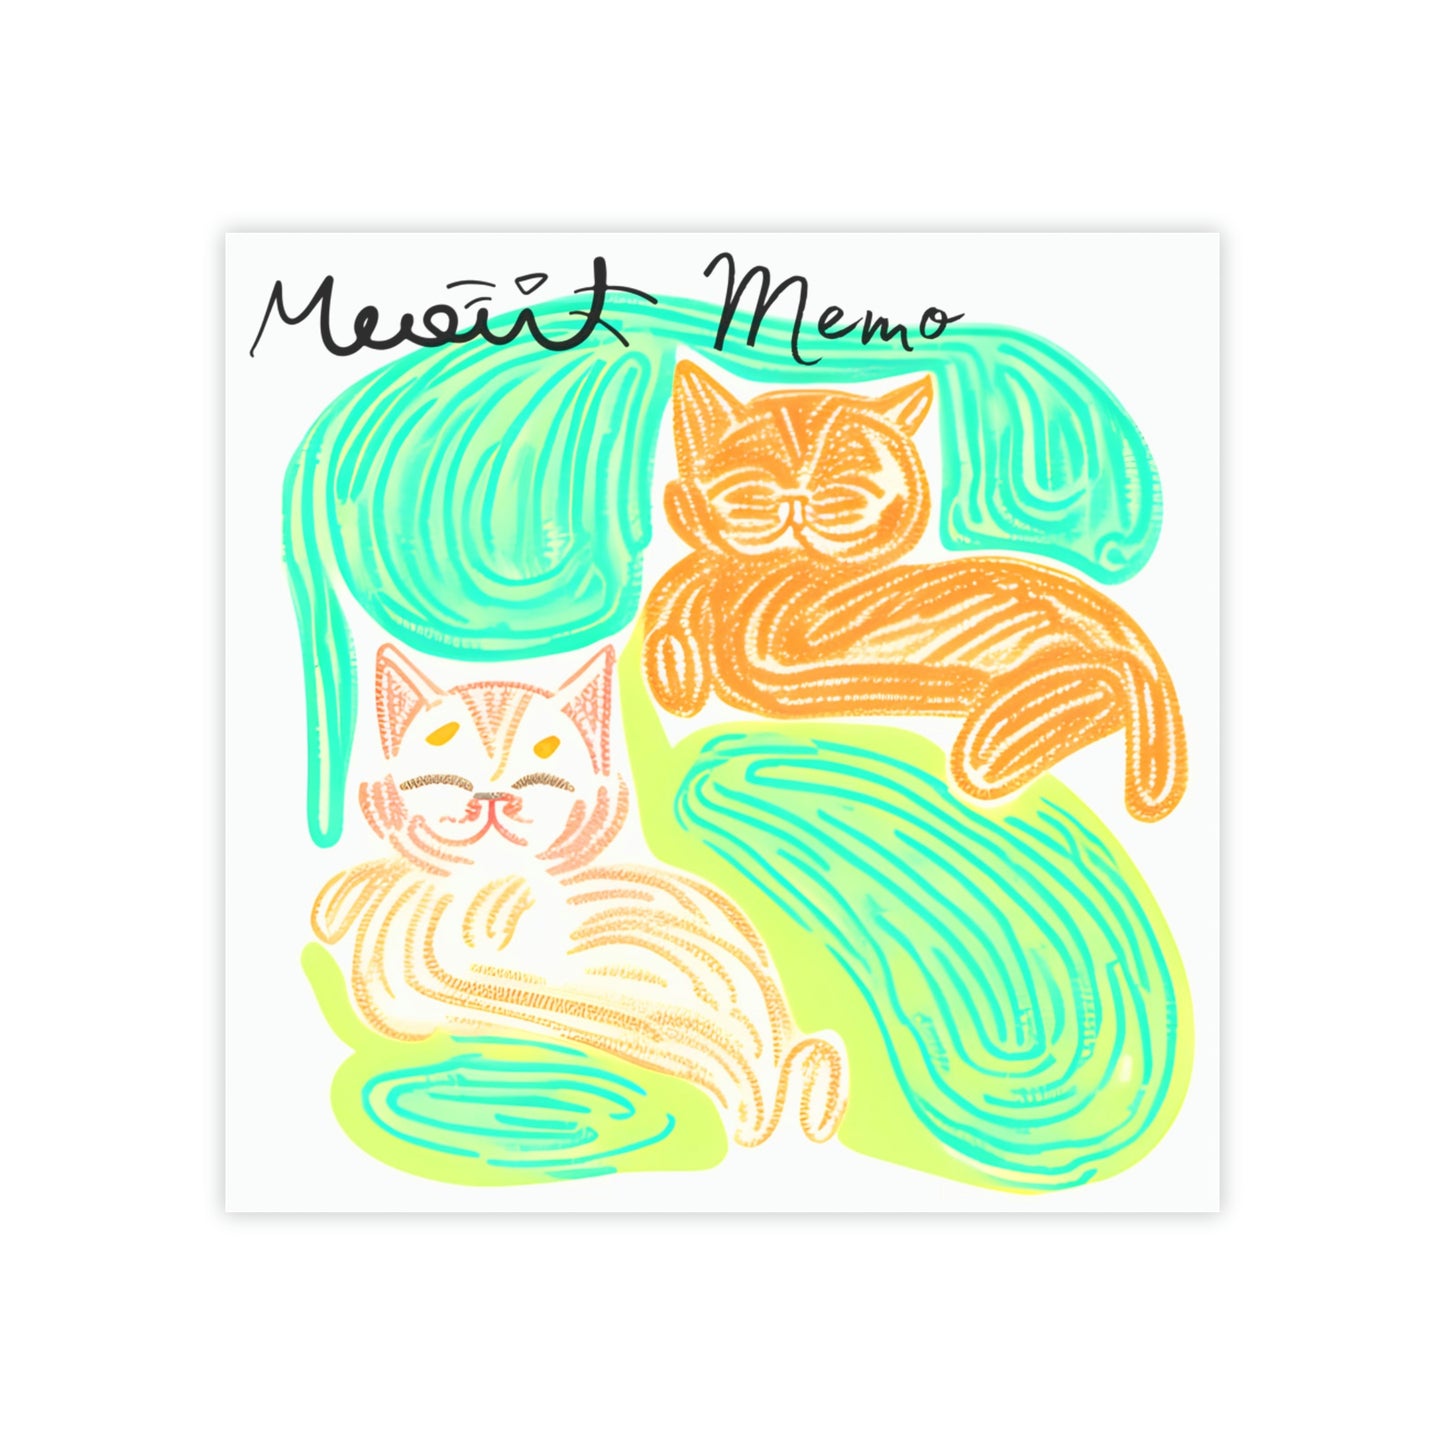 Meow Memo Cute Hand Drawing Cats design Post-it® Note Pads